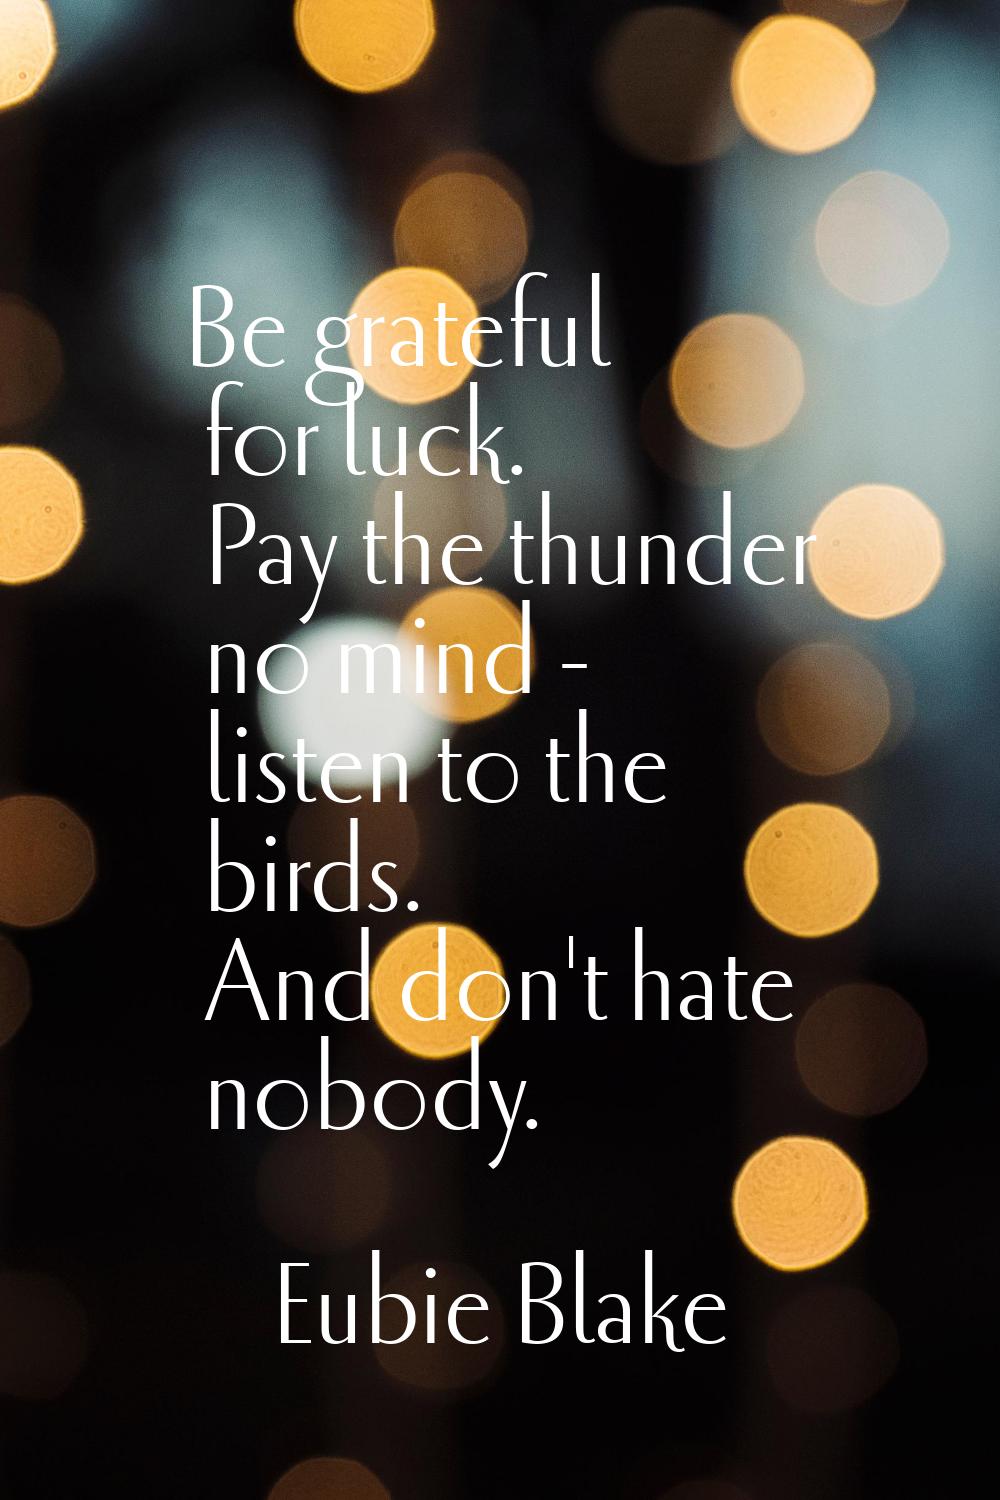 Be grateful for luck. Pay the thunder no mind - listen to the birds. And don't hate nobody.